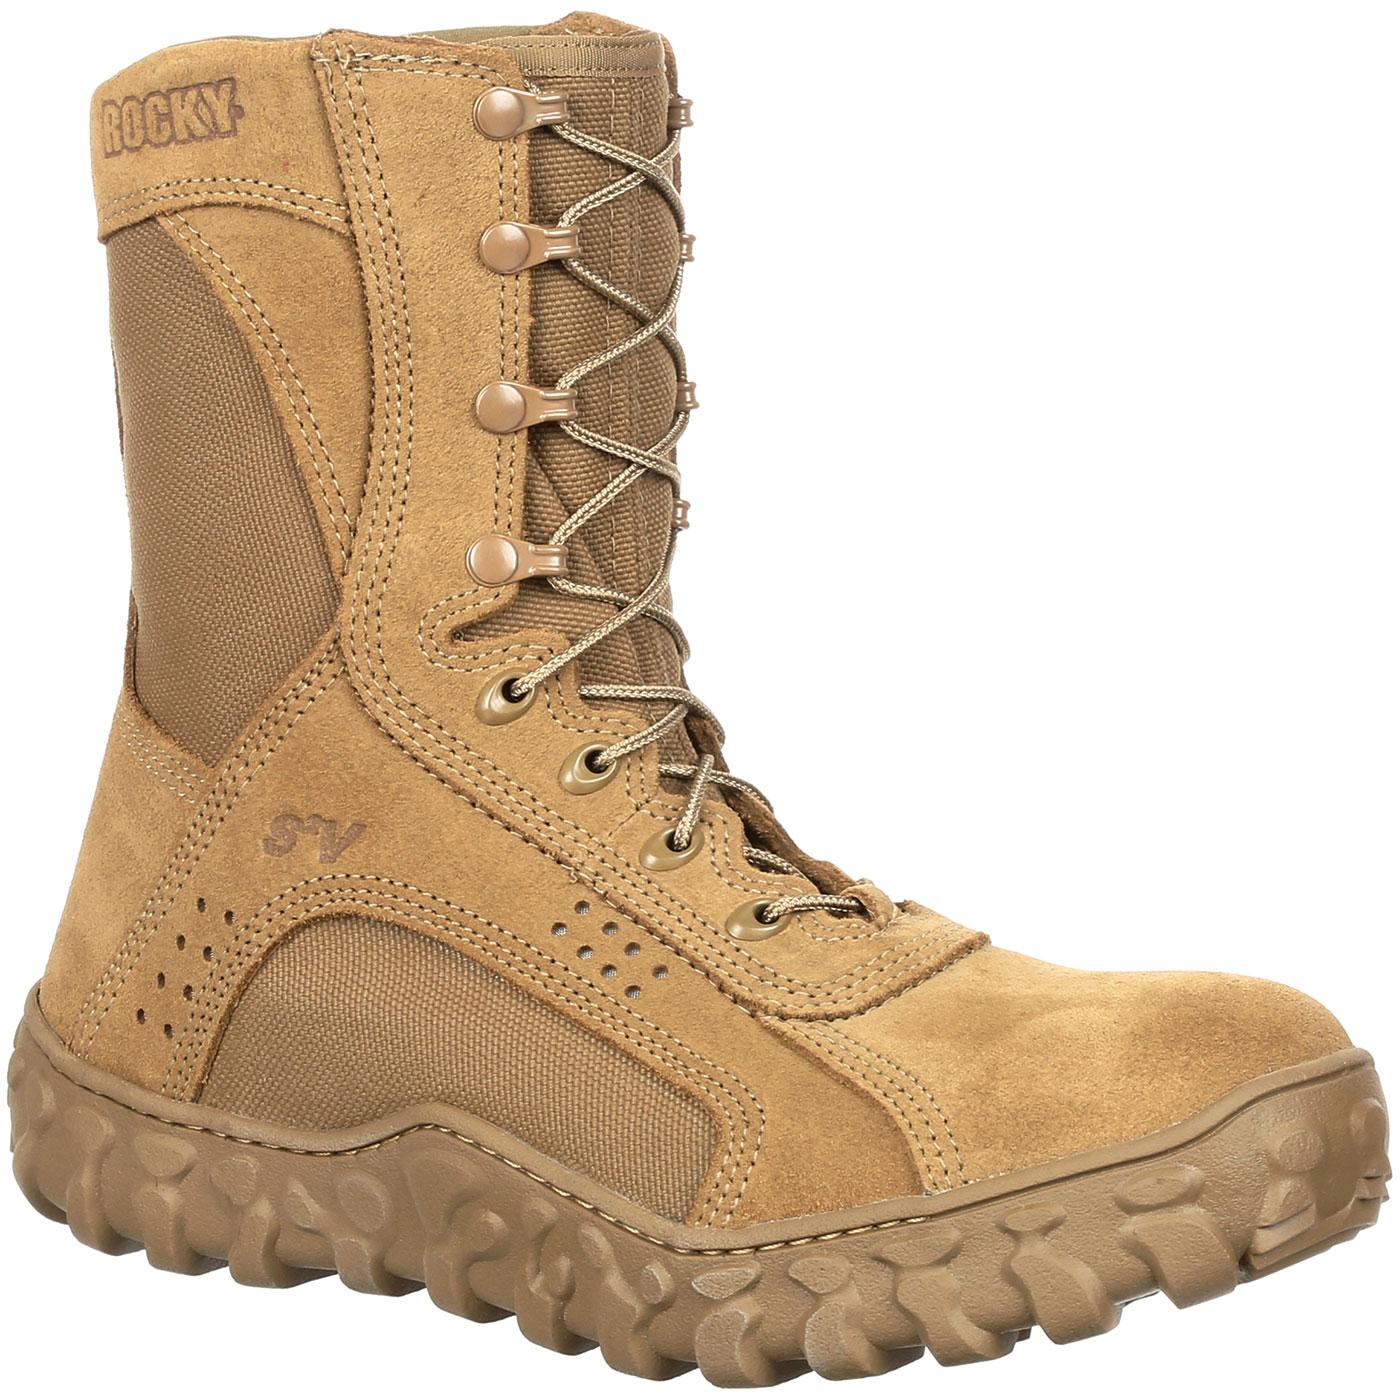 Rocky S2V: Steel Toe Tactical Military Boot, #RKC053